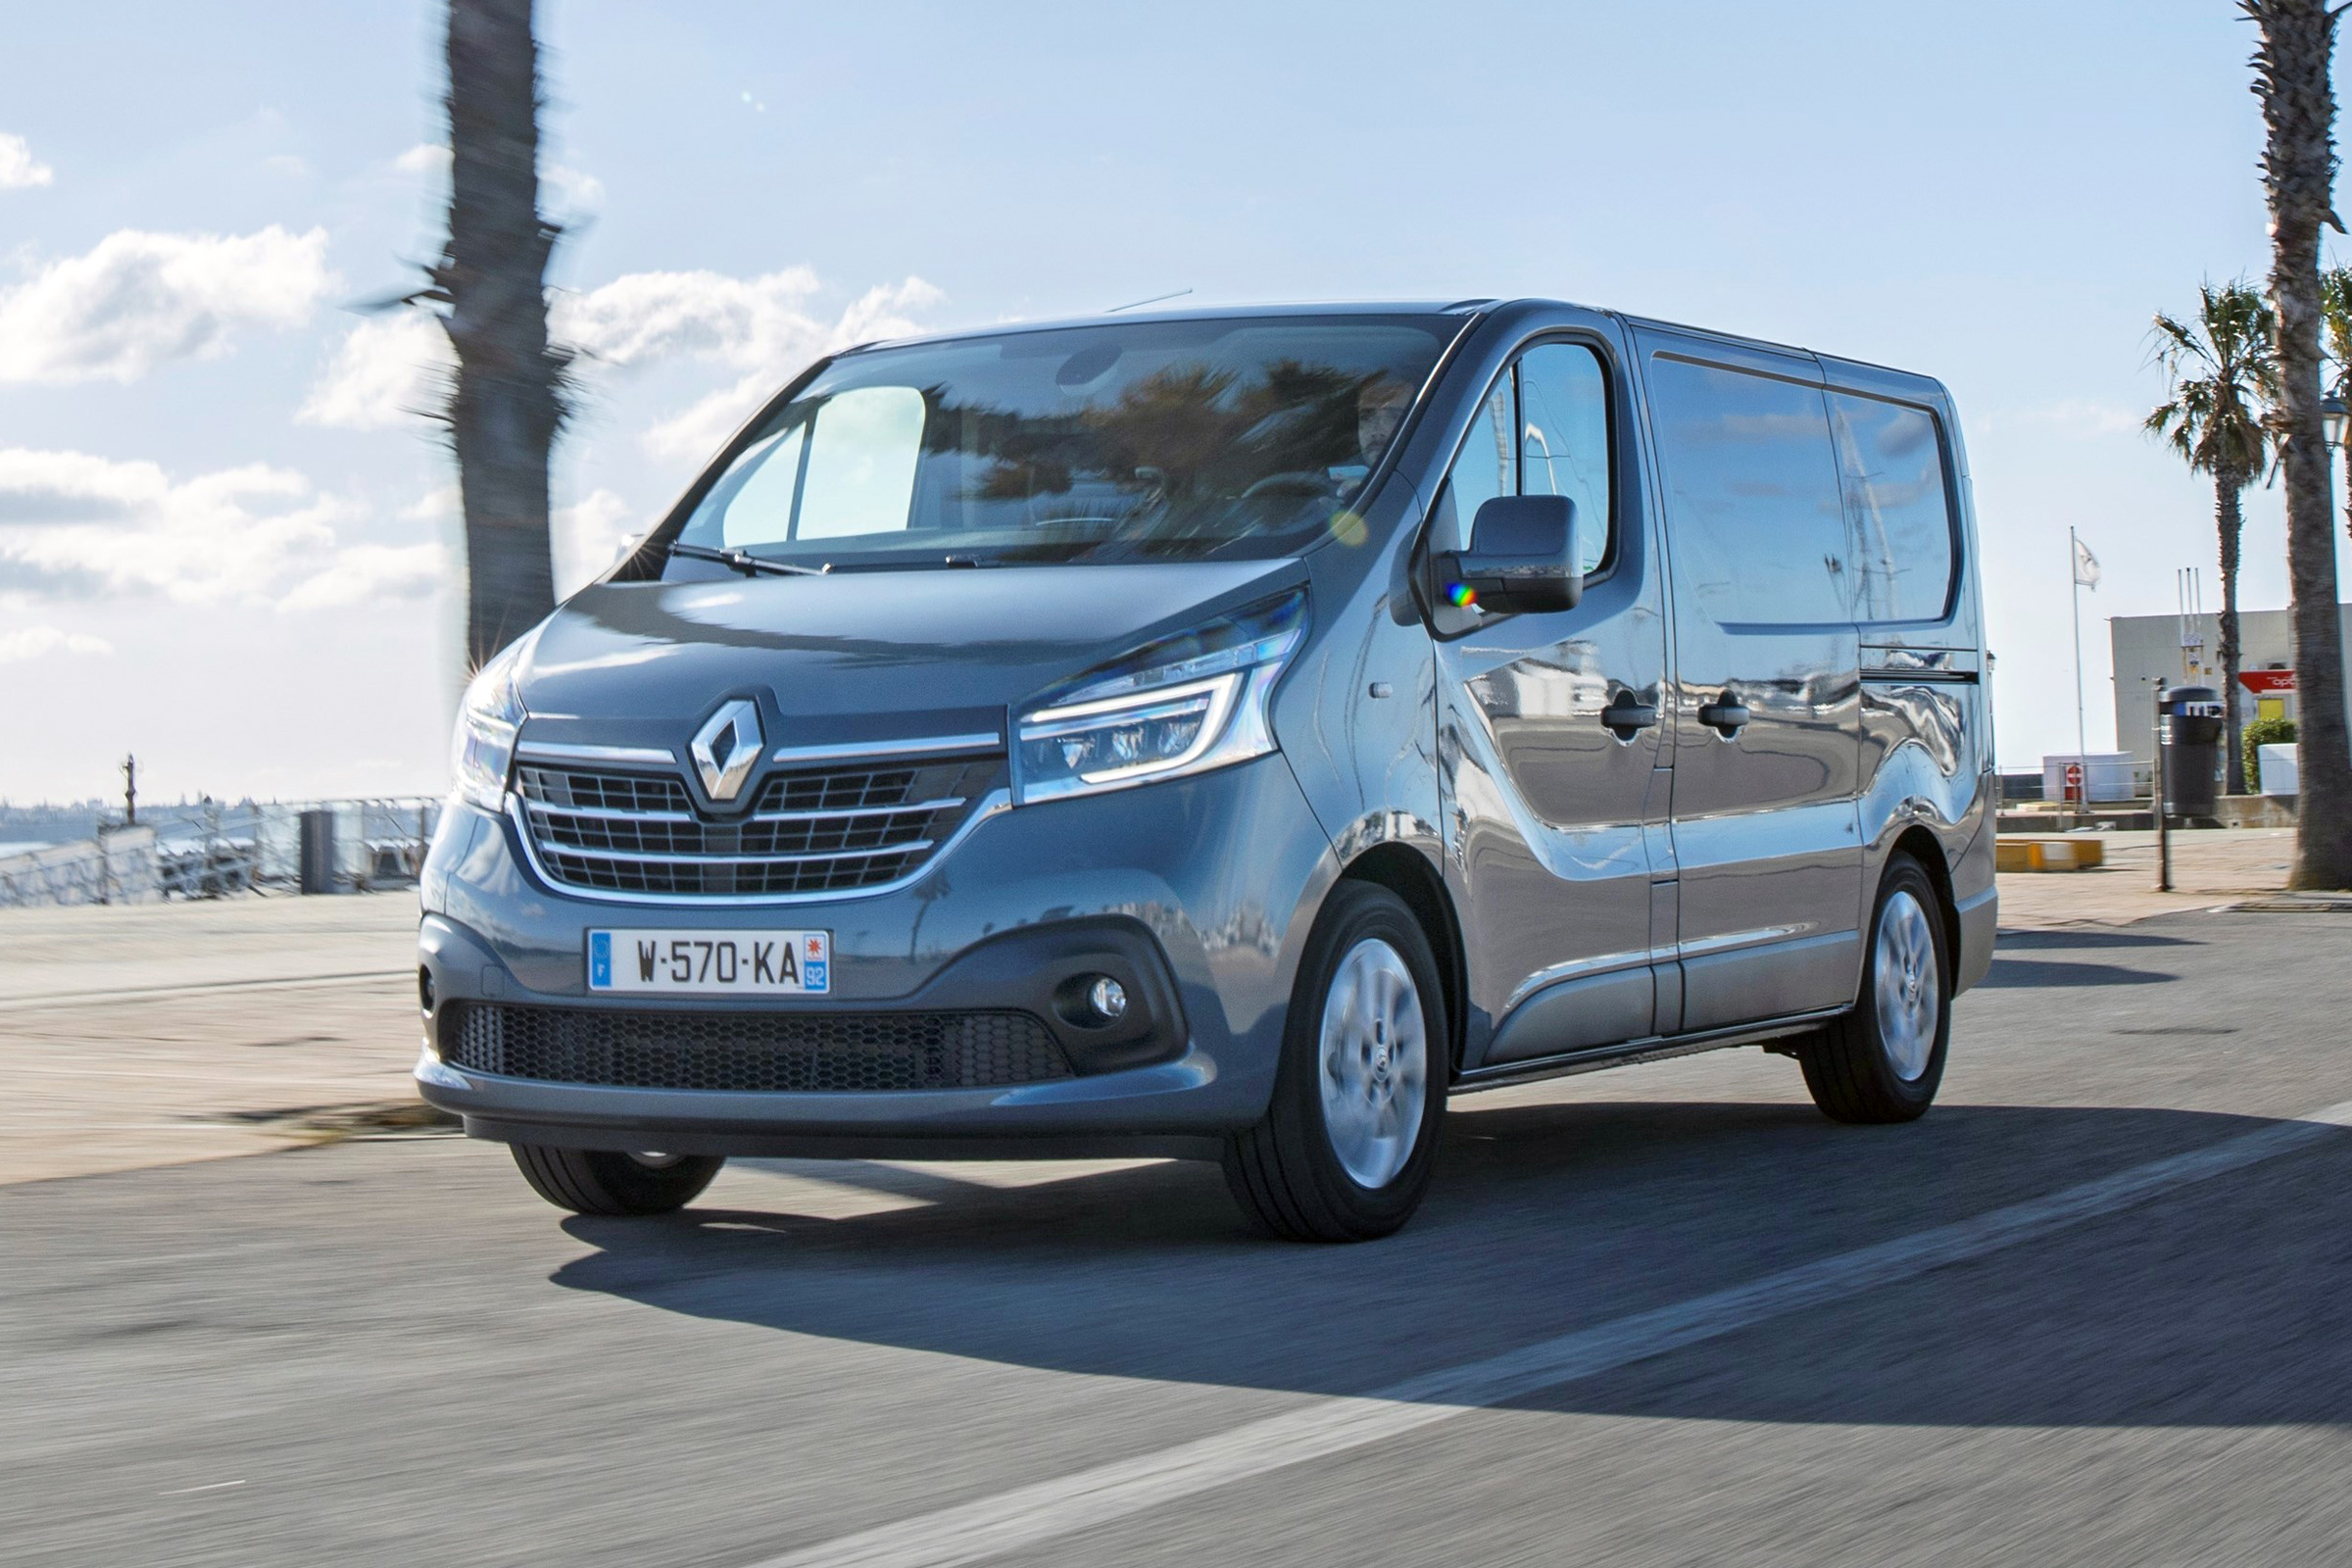 new renault trafic for sale